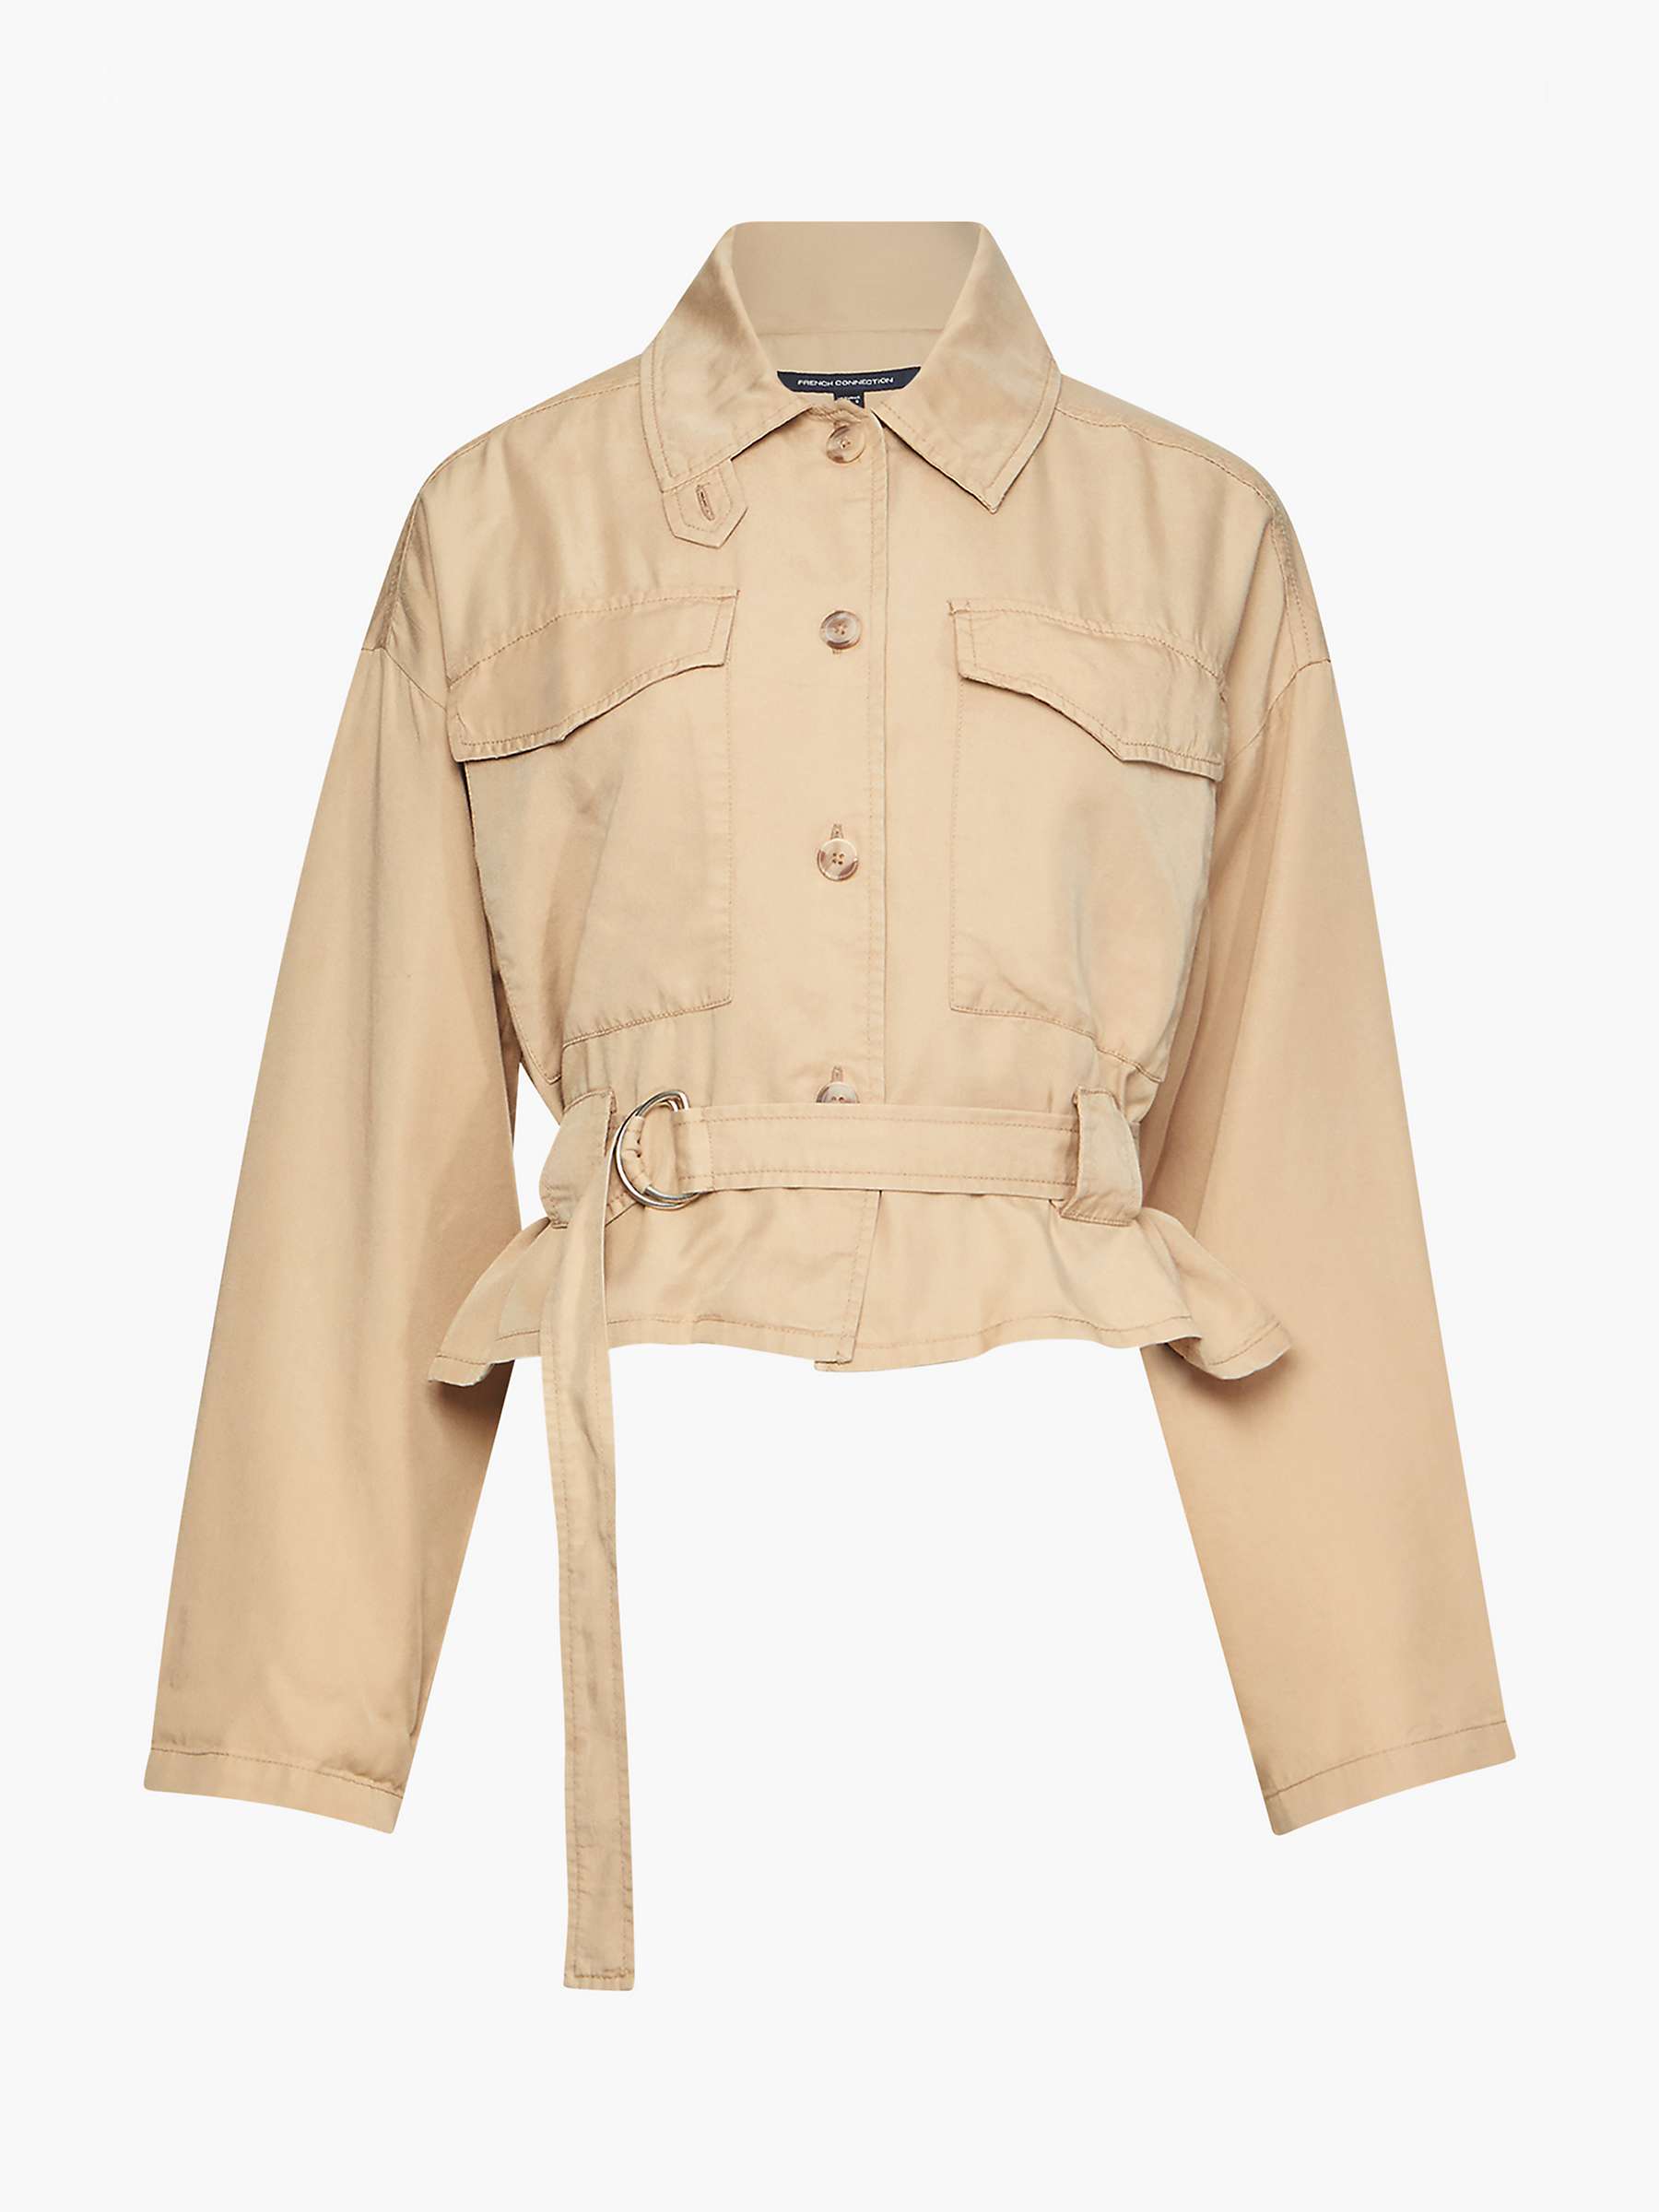 Buy French Connection Elkie Twill Combat Jacket, Incense Online at johnlewis.com